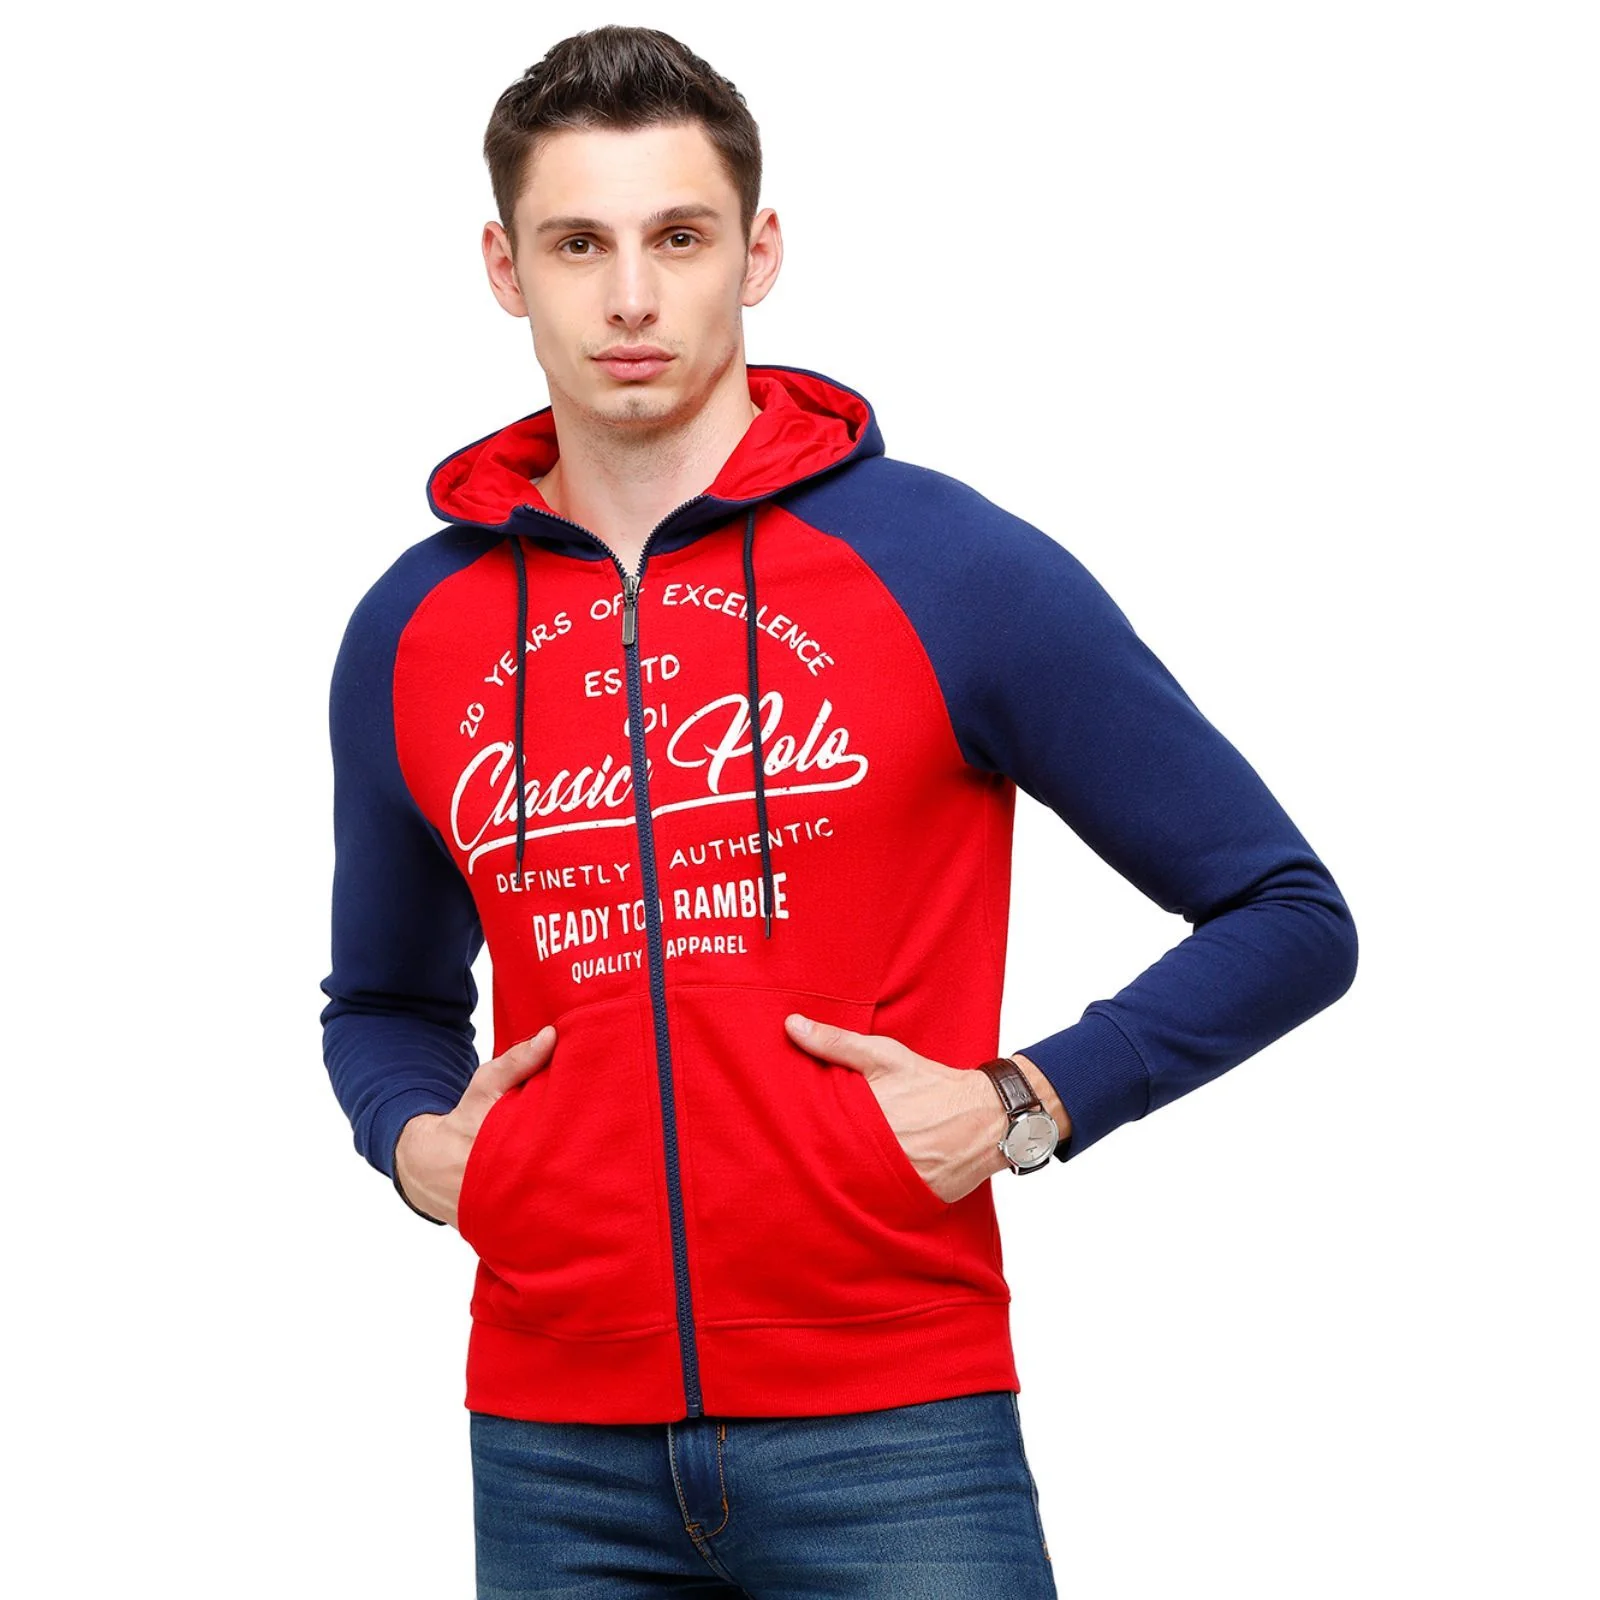 Classic Polo Men's Printed Full Sleeve Red & Blue Hood Sweat Shirt - CPSS-327A